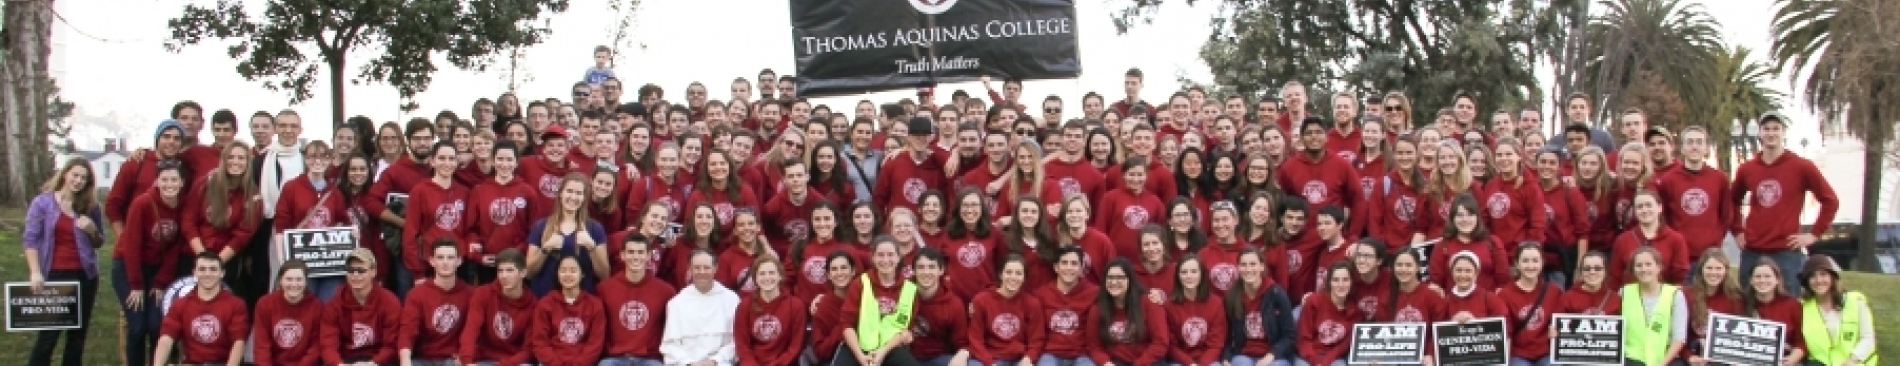 Join Members of the College Community at the March for Life